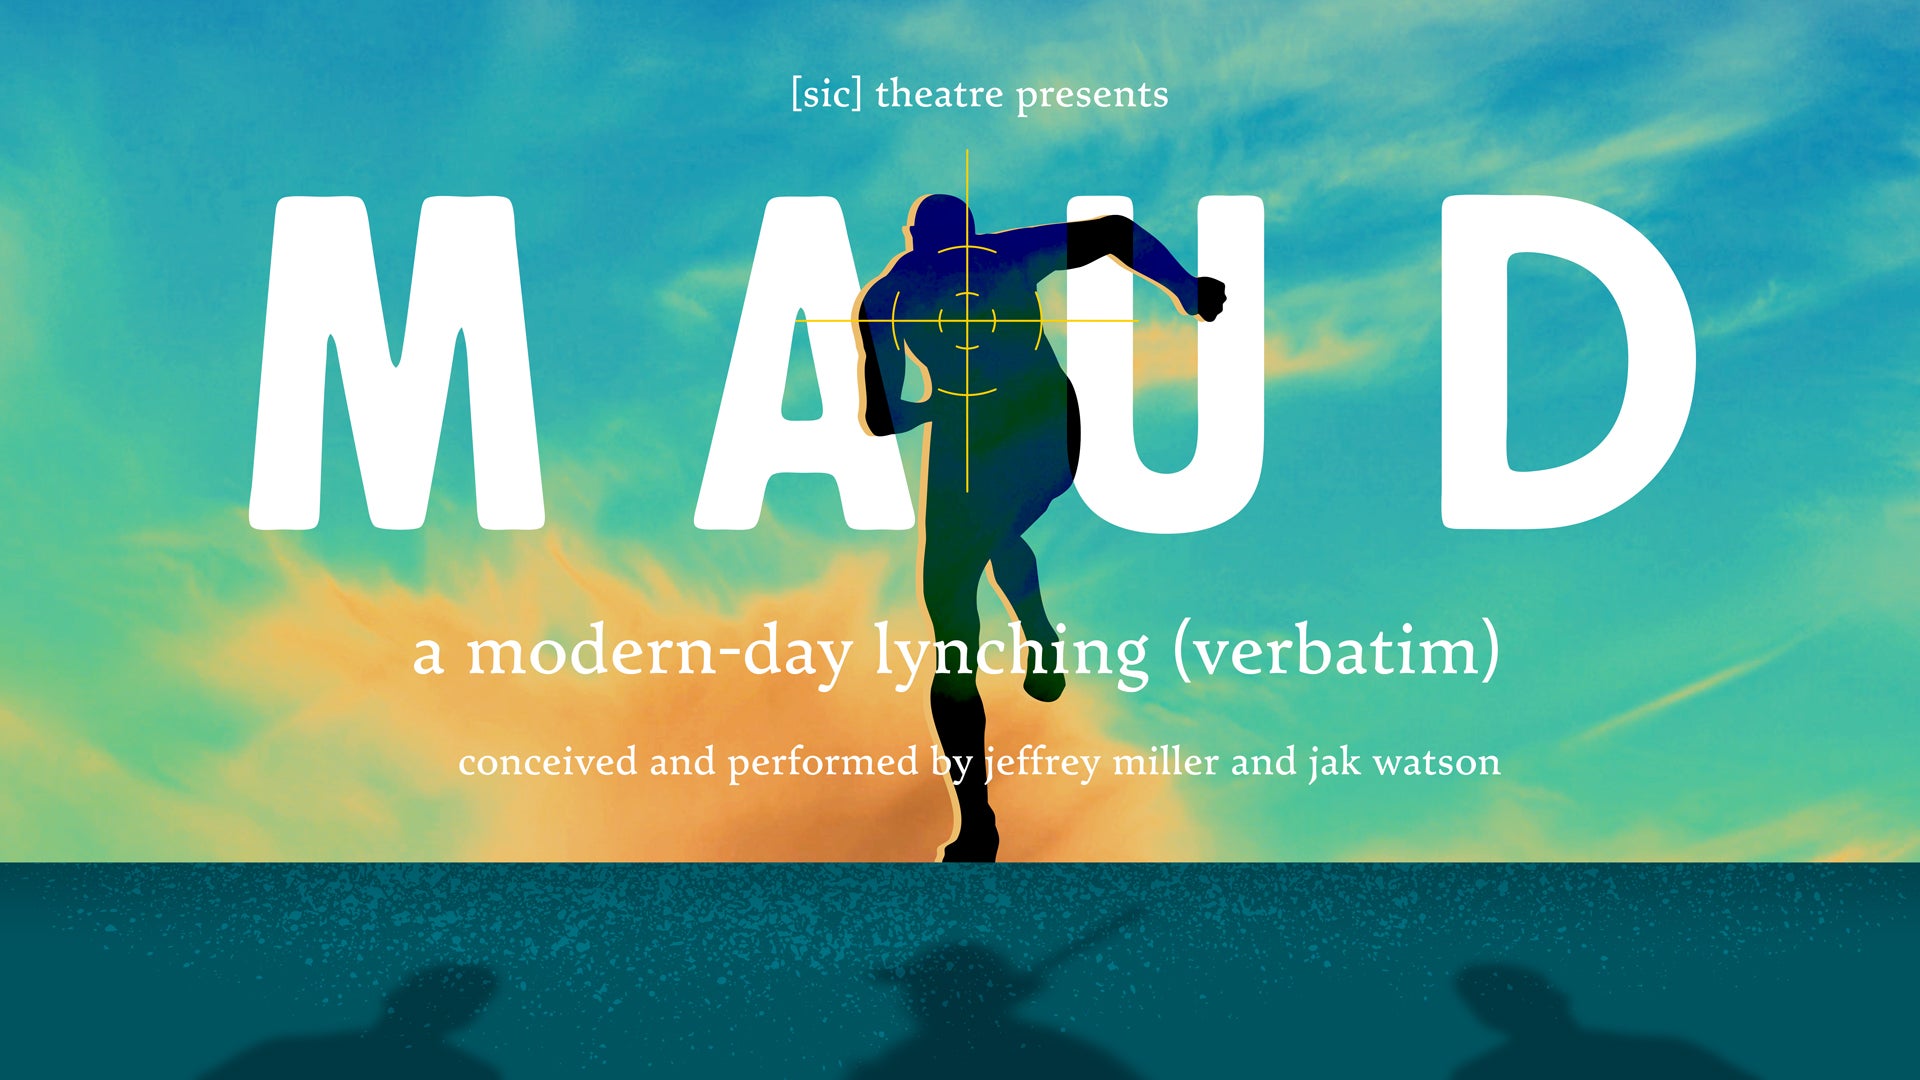 The poster for ‘Maud’